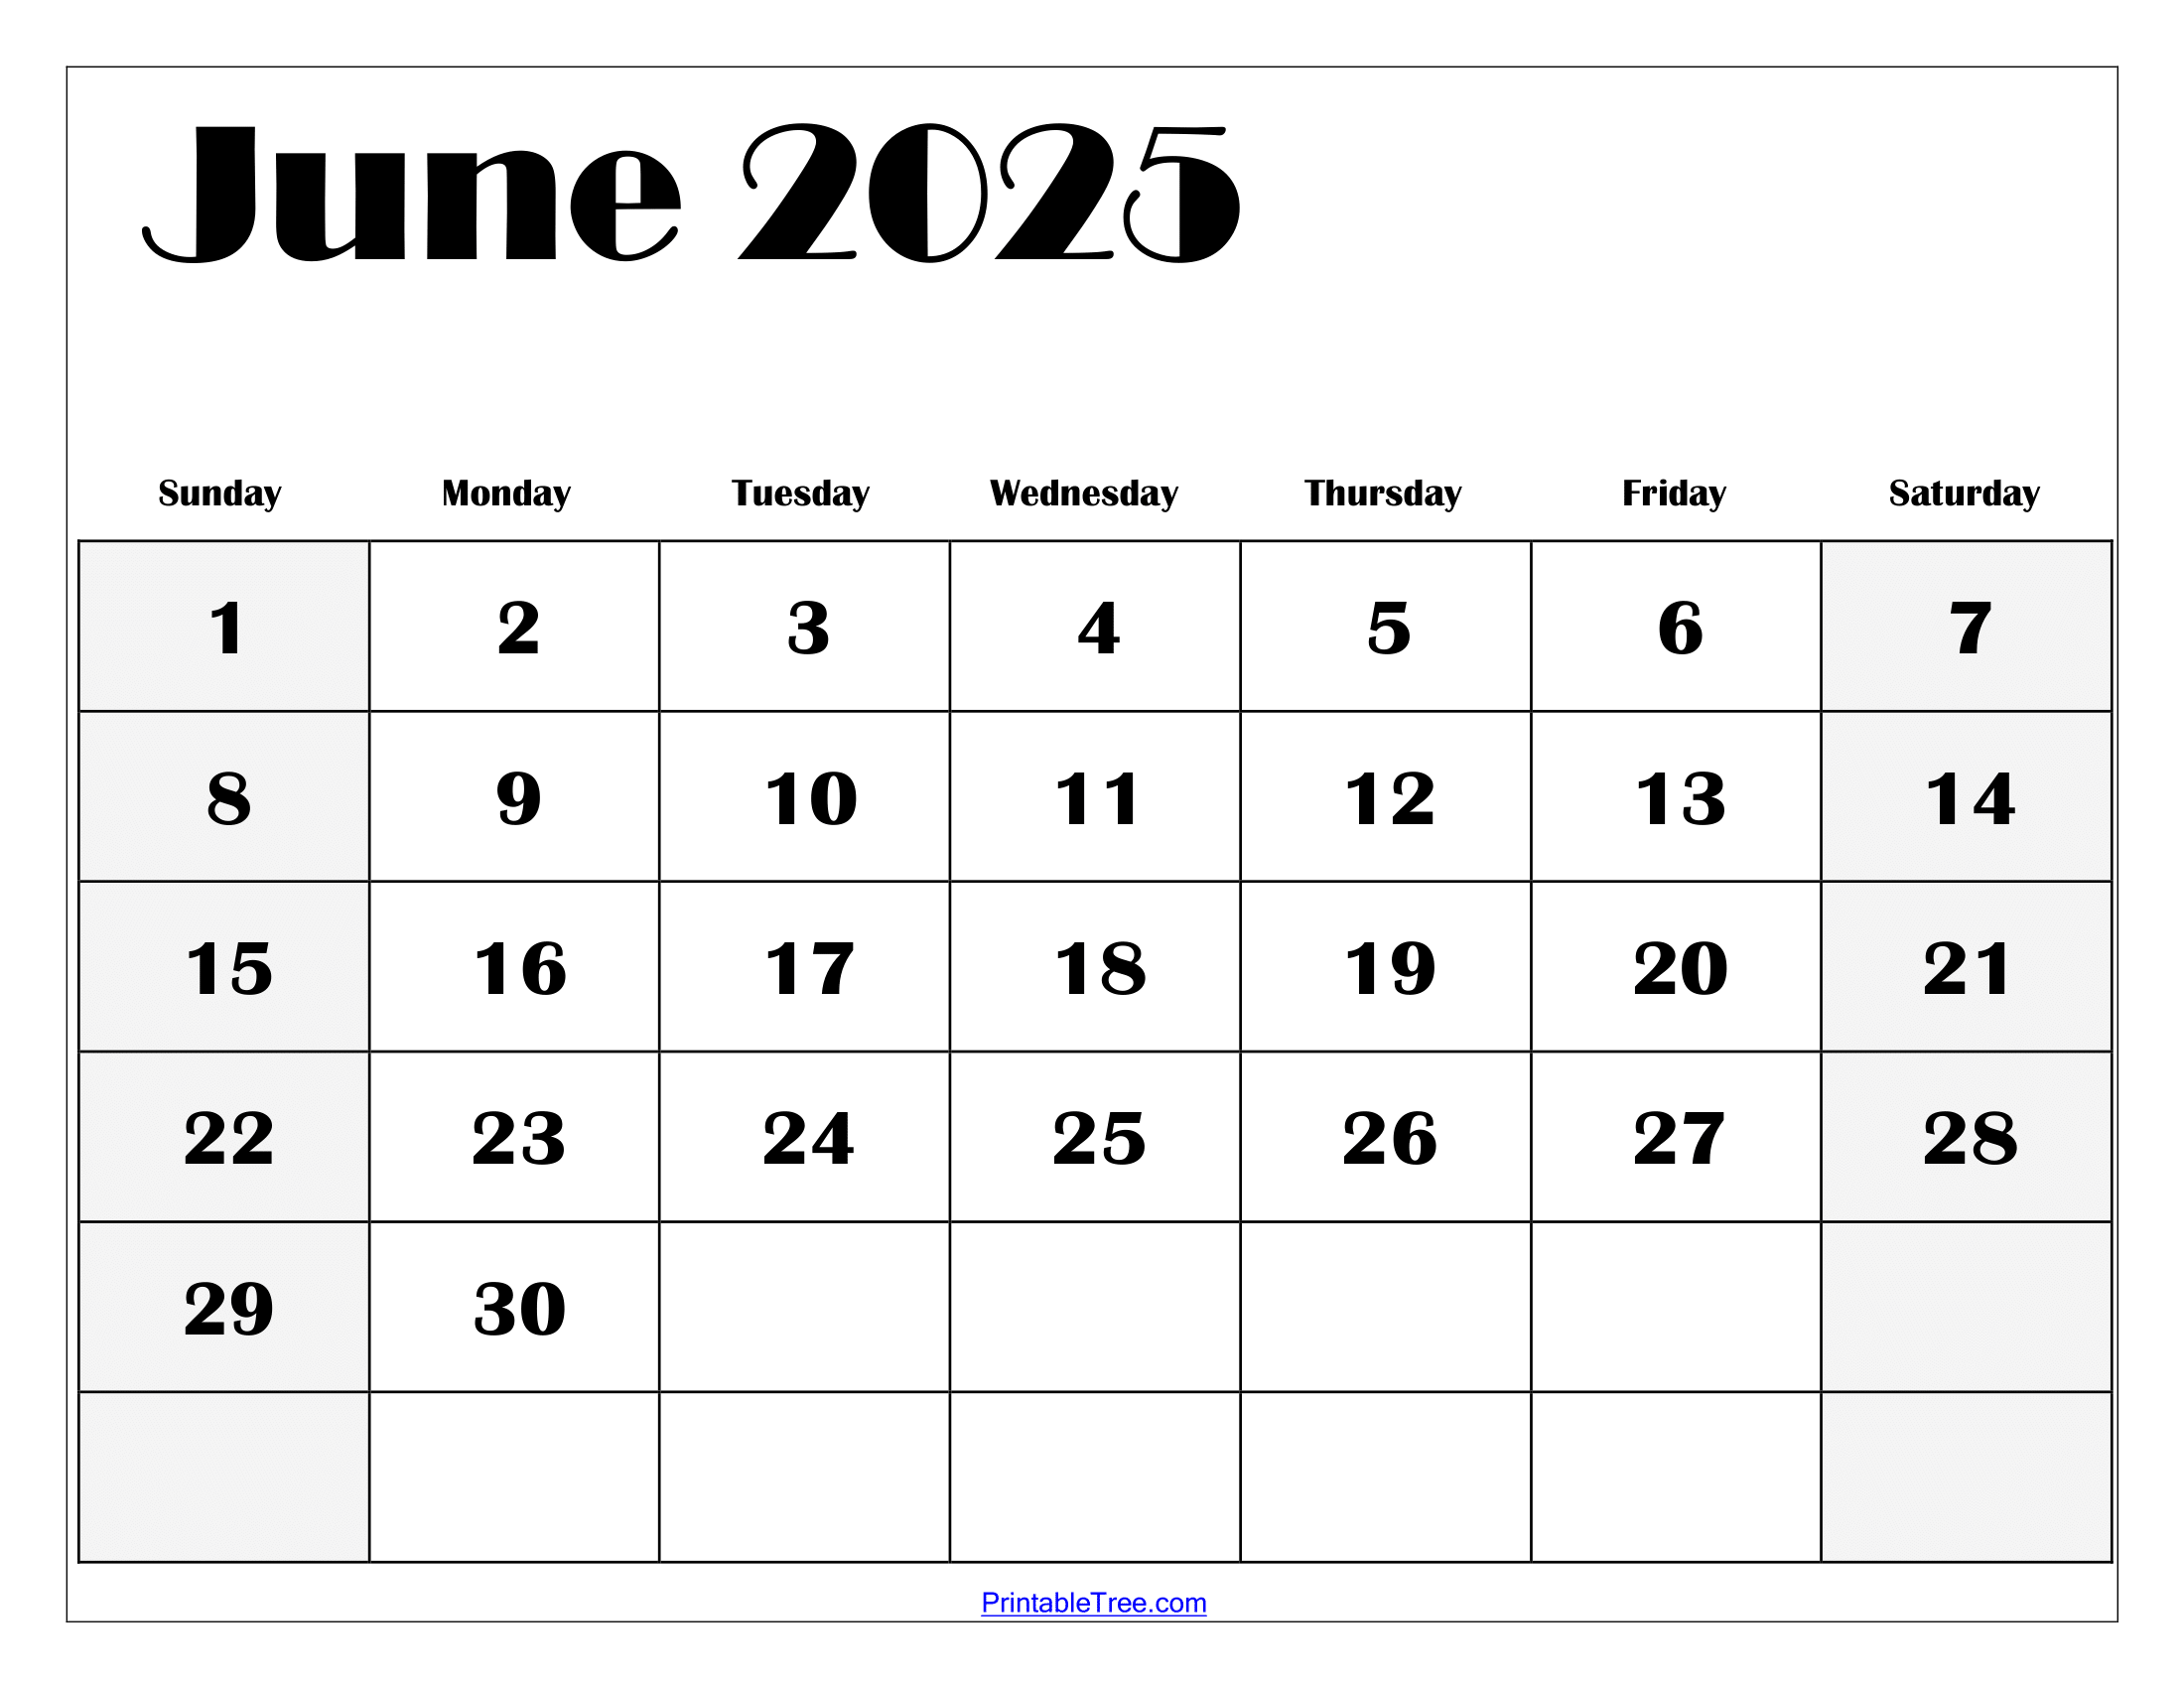 Free June 2025 Calendar Printable Pdf Template With Holidays throughout Month Of June 2025 Calendar